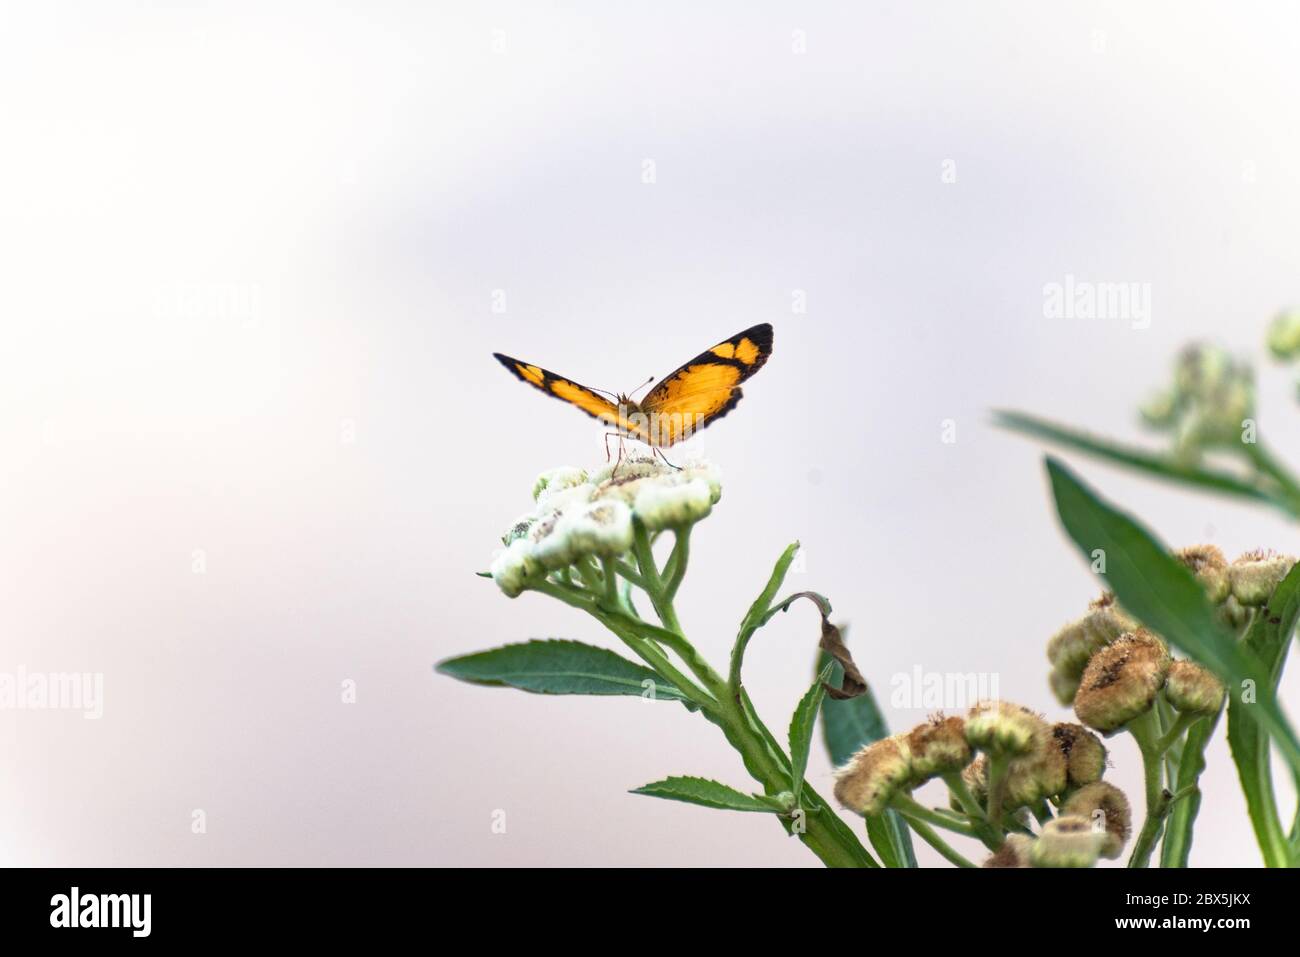 A Yellow Butterfly on a Flower Stock Photo